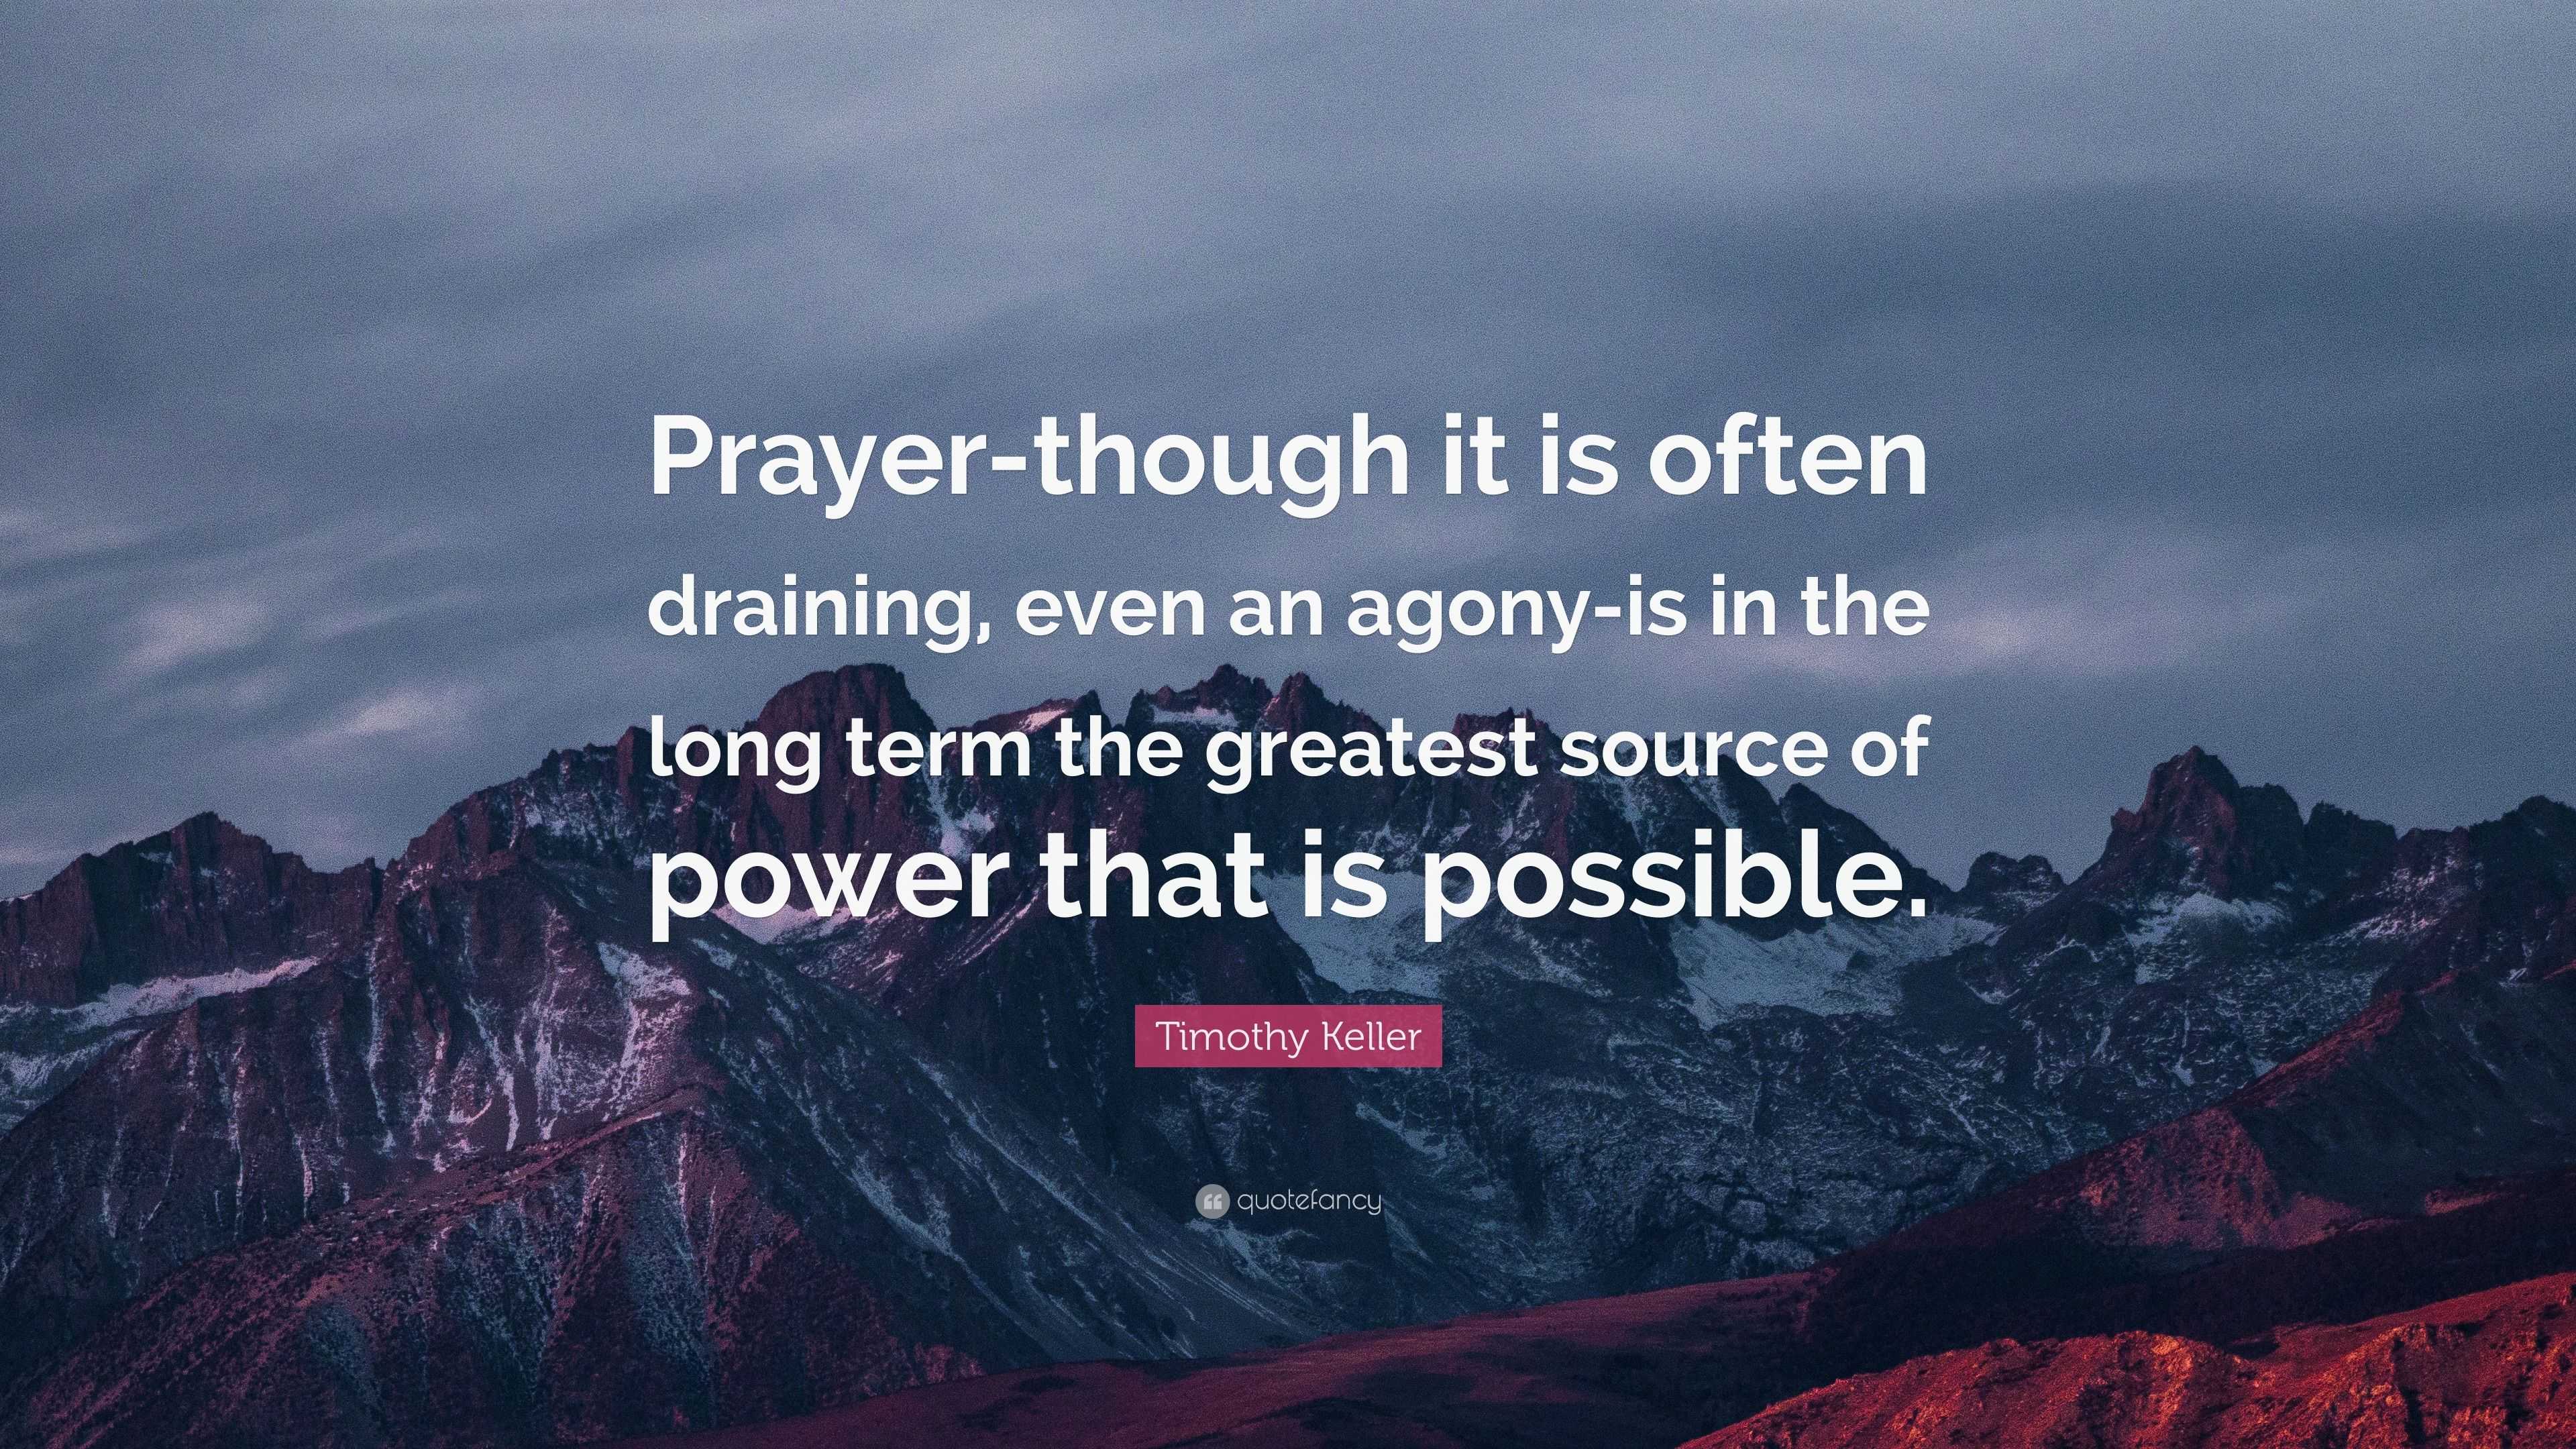 Timothy Keller Quote: “Prayer-though it is often draining, even an ...